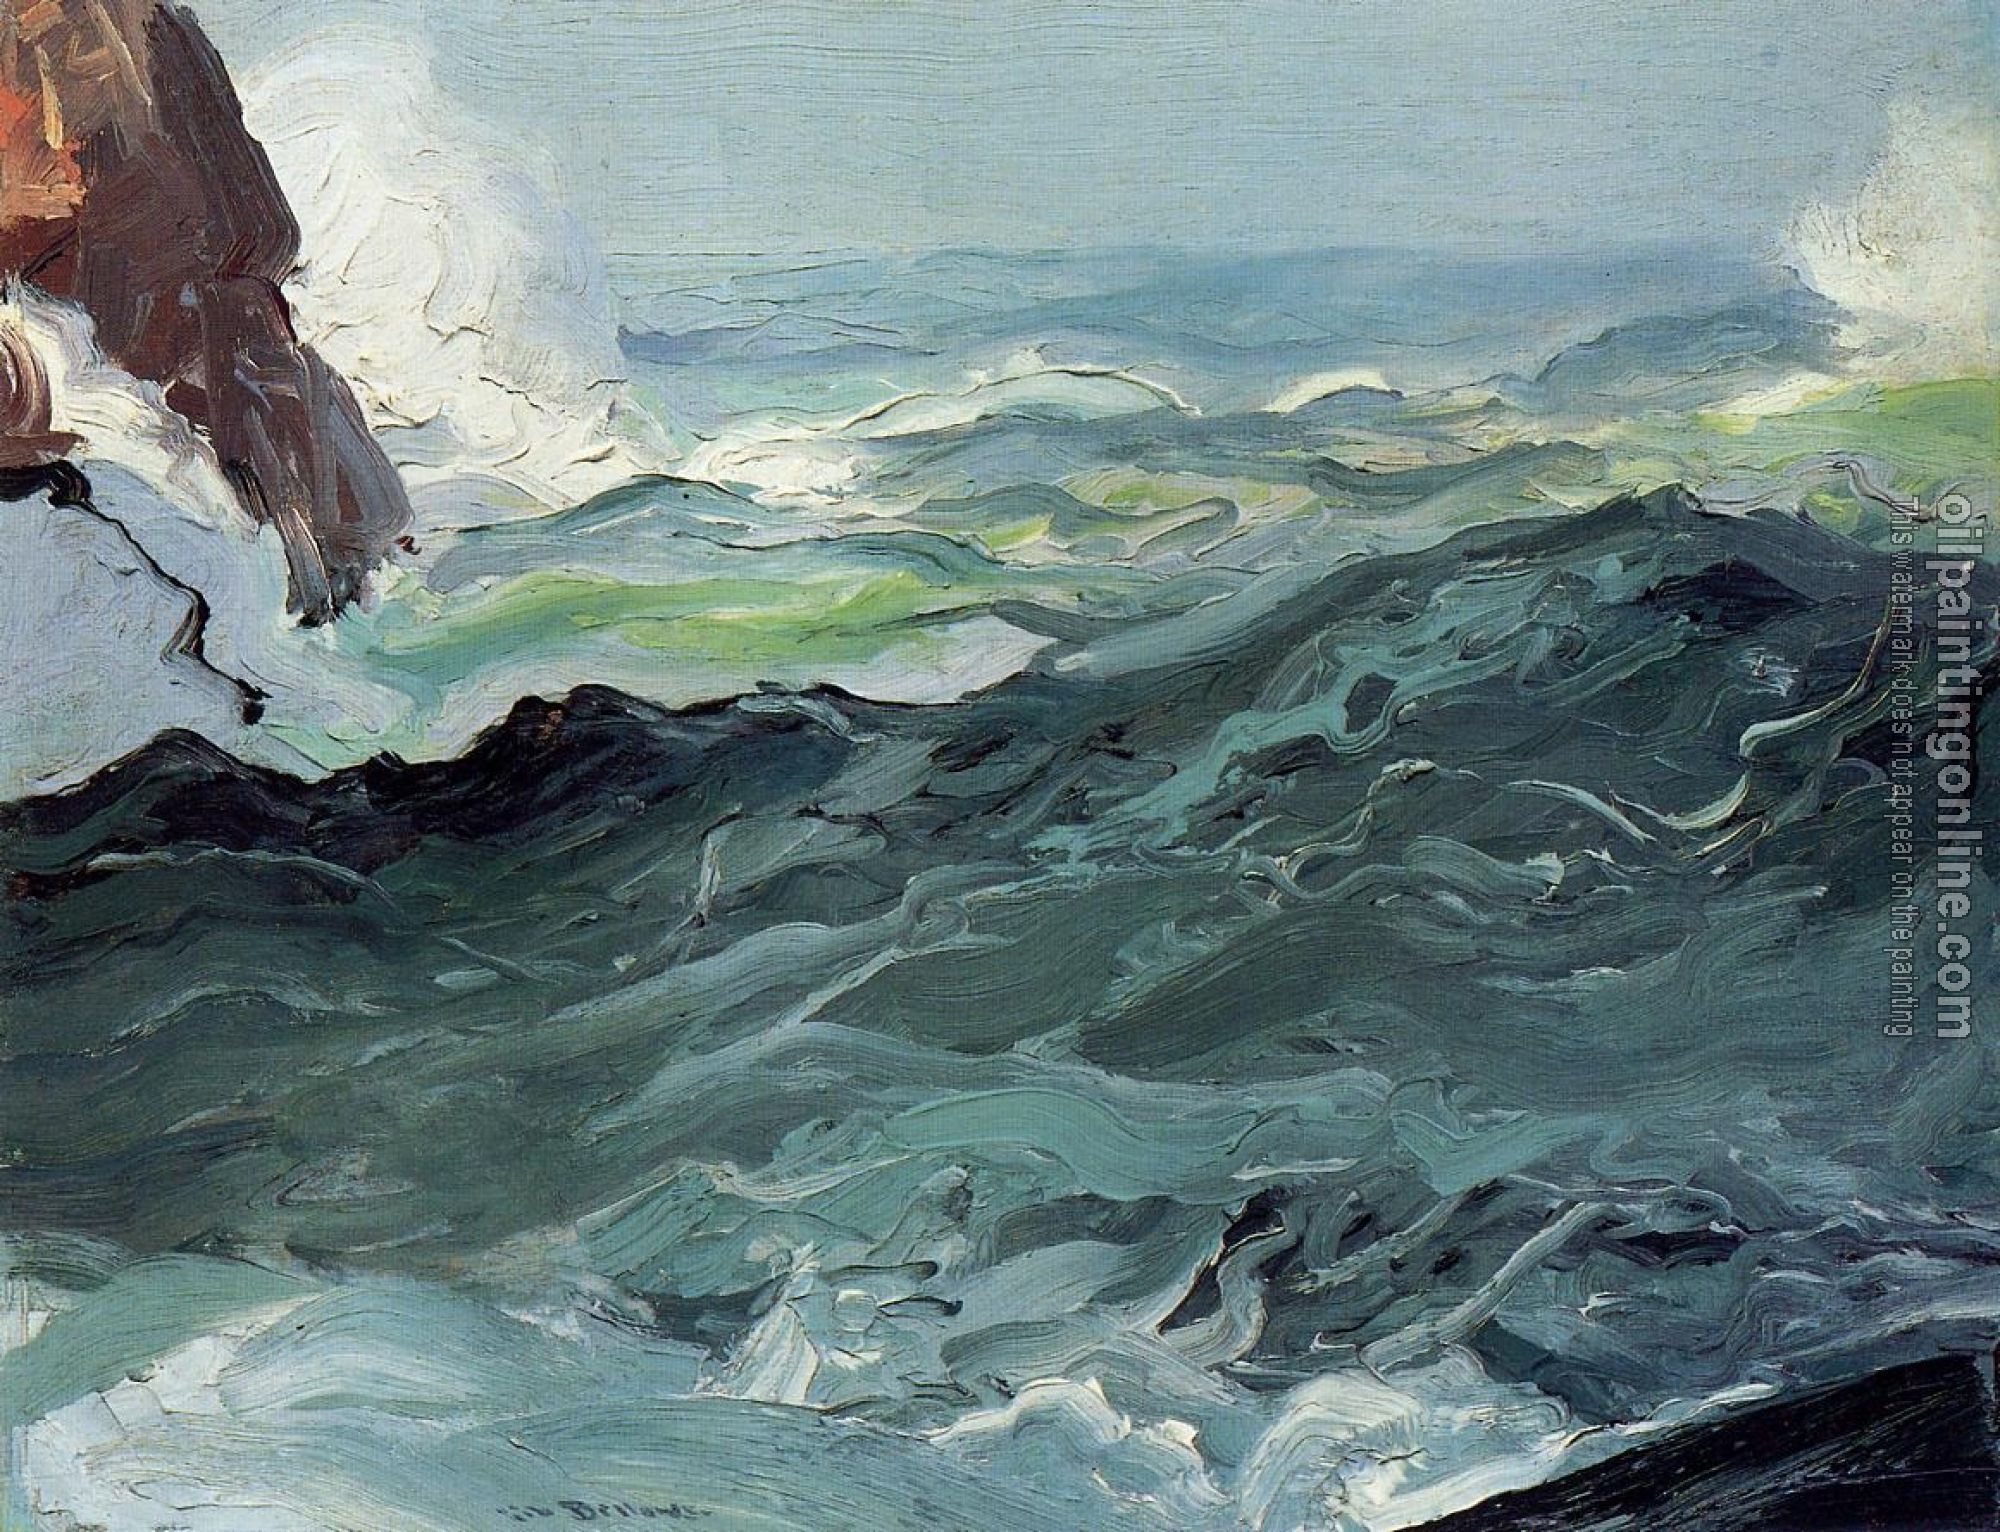 Bellows, George - Wave